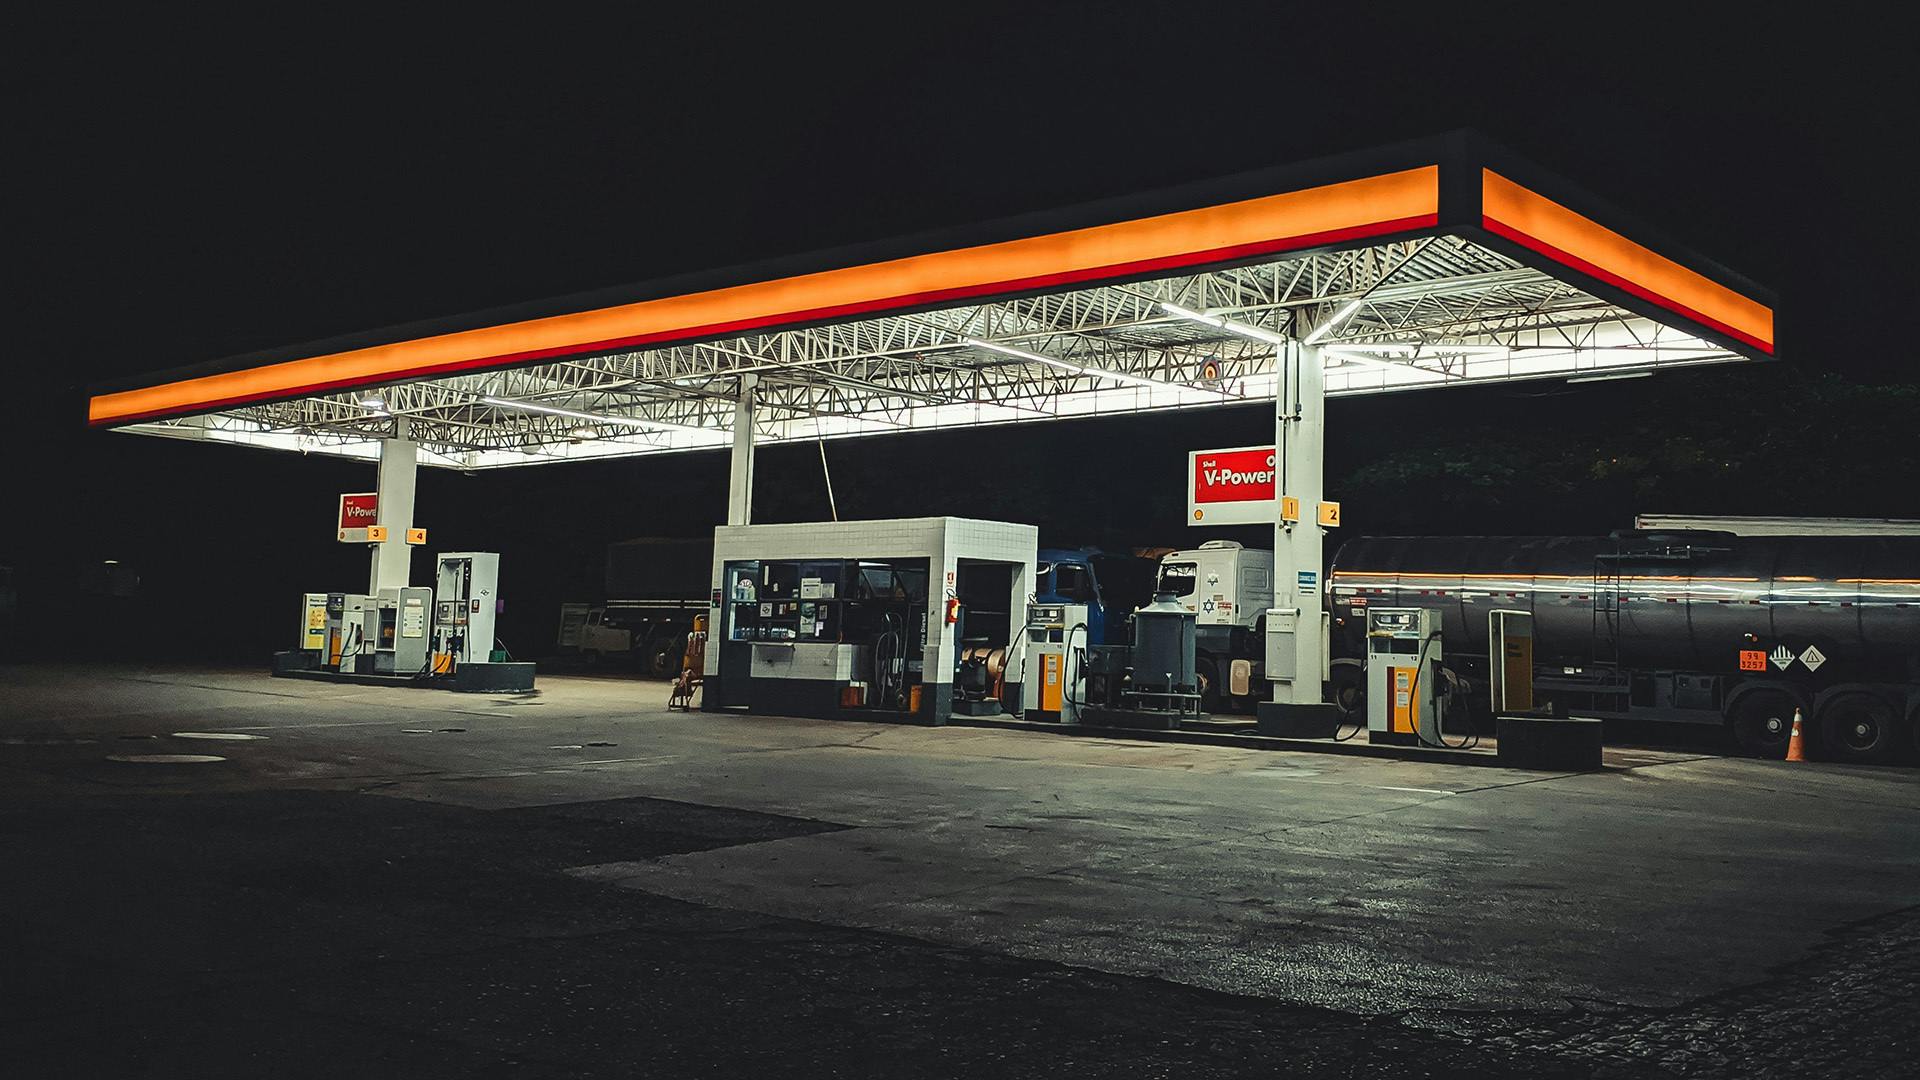 https://wsa-website-assets.s3.amazonaws.com/assets/images/shell_fuel_station.jpg